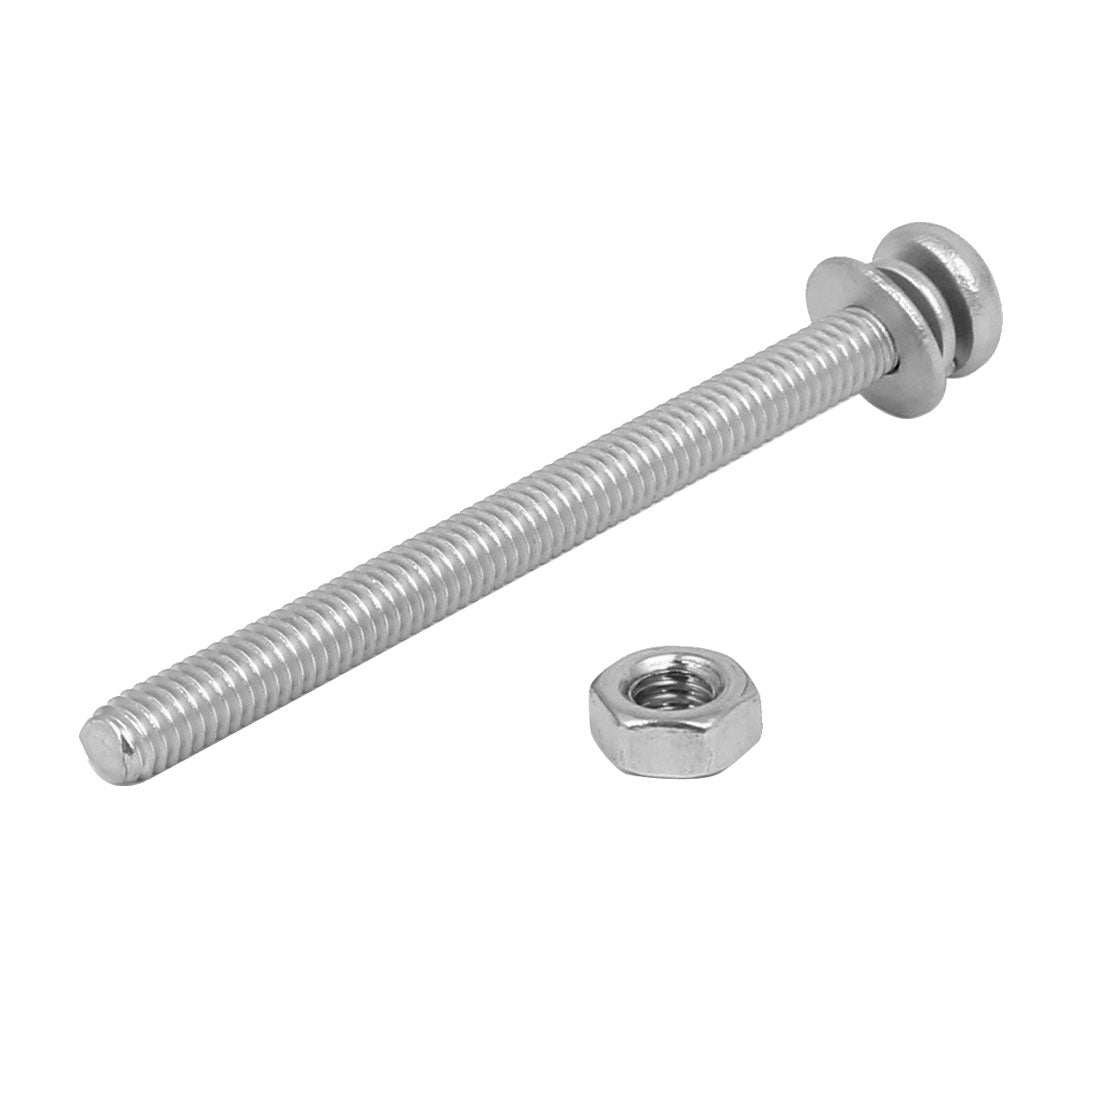 uxcell Uxcell M4 x 50mm 304 Stainless Steel Phillips Pan Head Screws Nuts w Washers 15 Sets